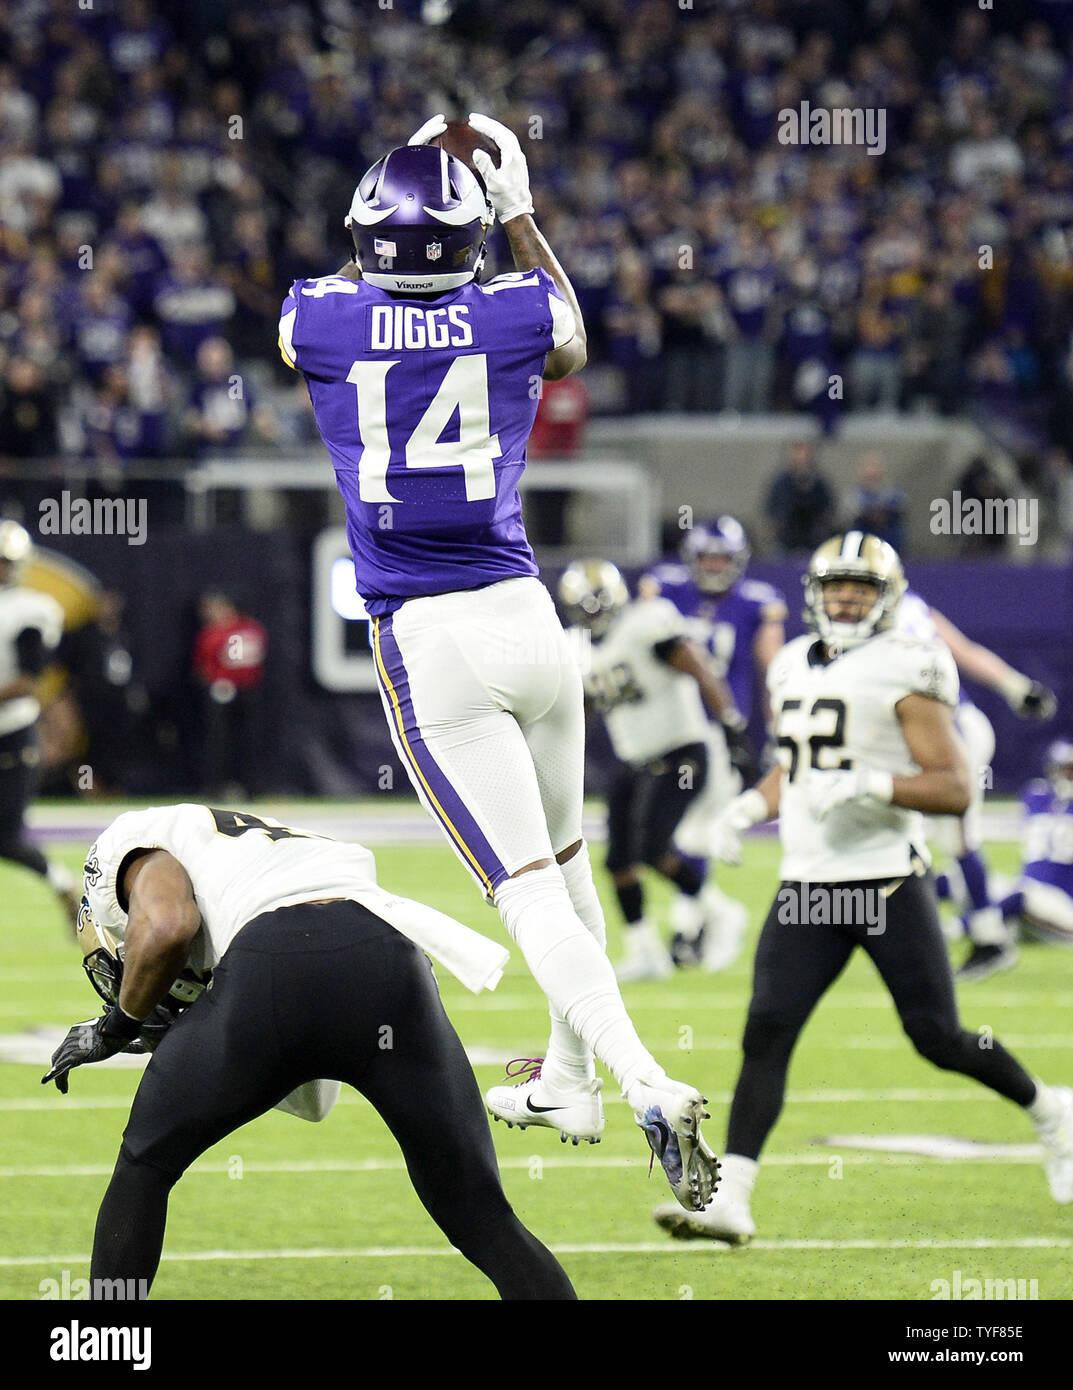 https://c8.alamy.com/comp/TYF85E/minnesota-vikings-wide-receiver-stefon-diggs-catches-a-61-yard-game-winning-touchdown-pass-during-the-fourth-quarter-of-the-nfc-divisional-round-playoff-game-against-the-new-orleans-saints-at-us-bank-stadium-in-minneapolis-on-january-14-2018-the-vikings-defeated-the-saints-29-24-to-advance-to-the-nfc-championship-game-photo-by-brian-kerseyupi-TYF85E.jpg